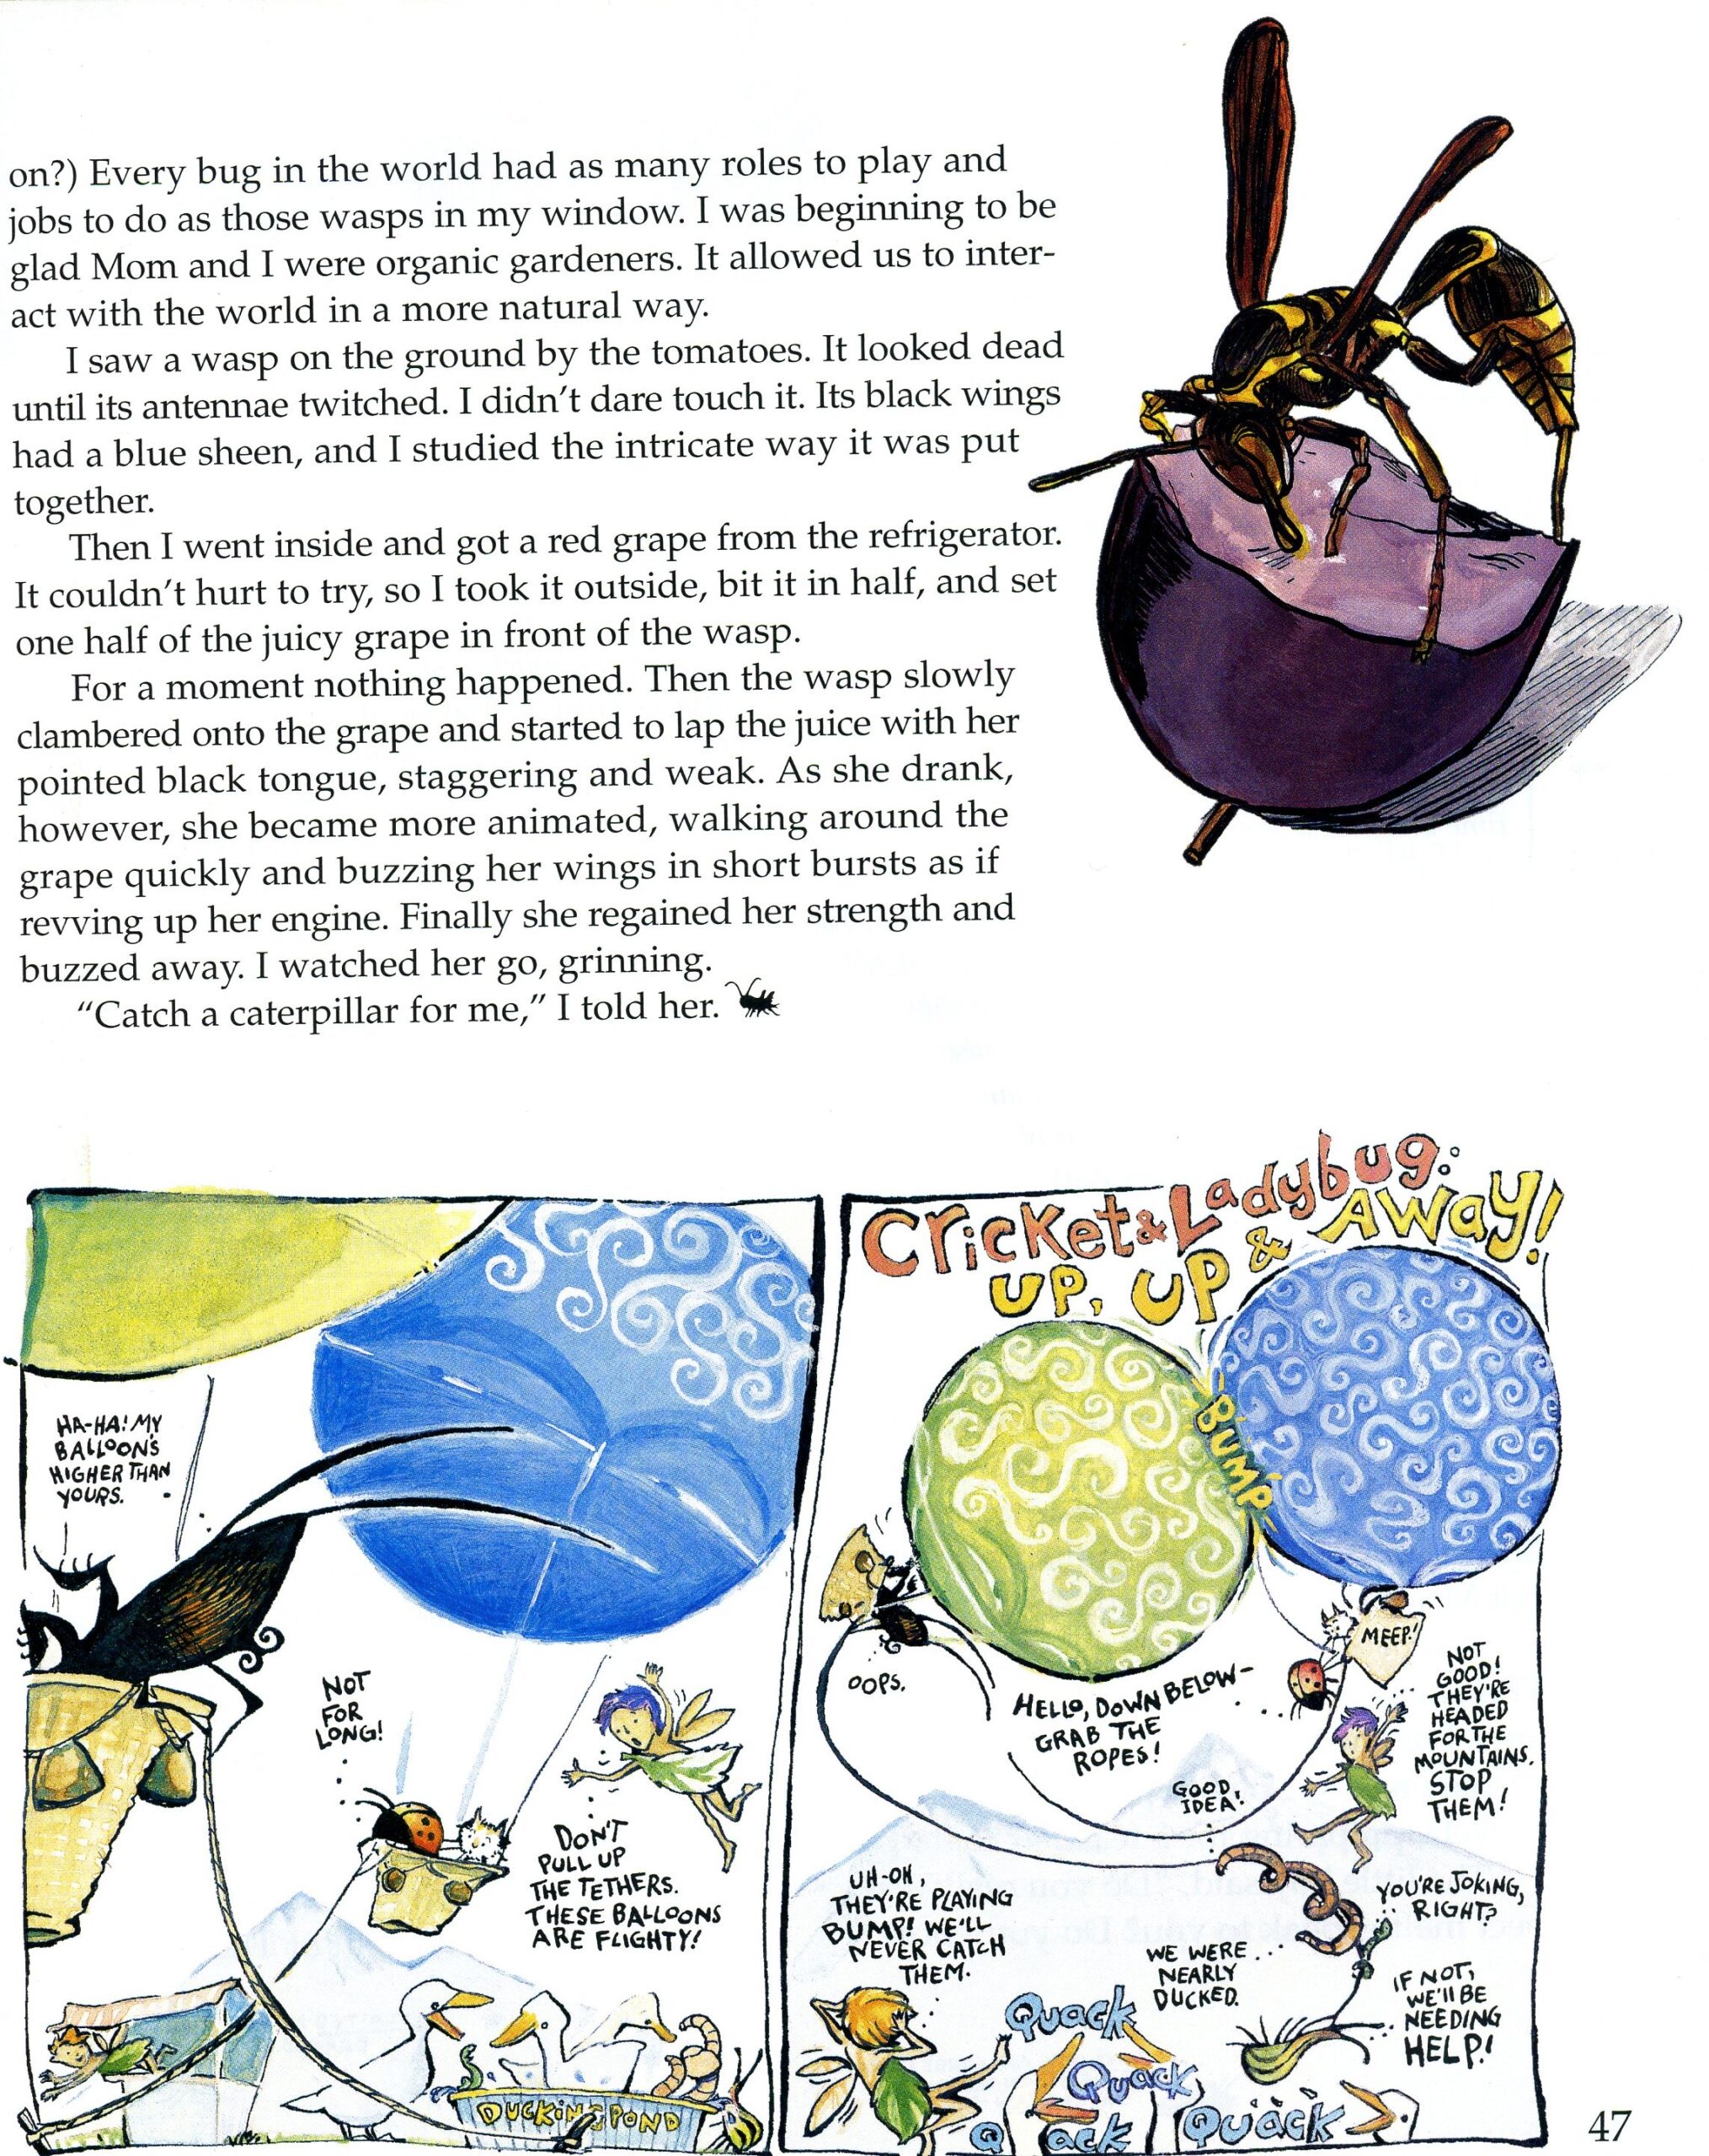 "The Wasps in the Window" -- Cricket magazine